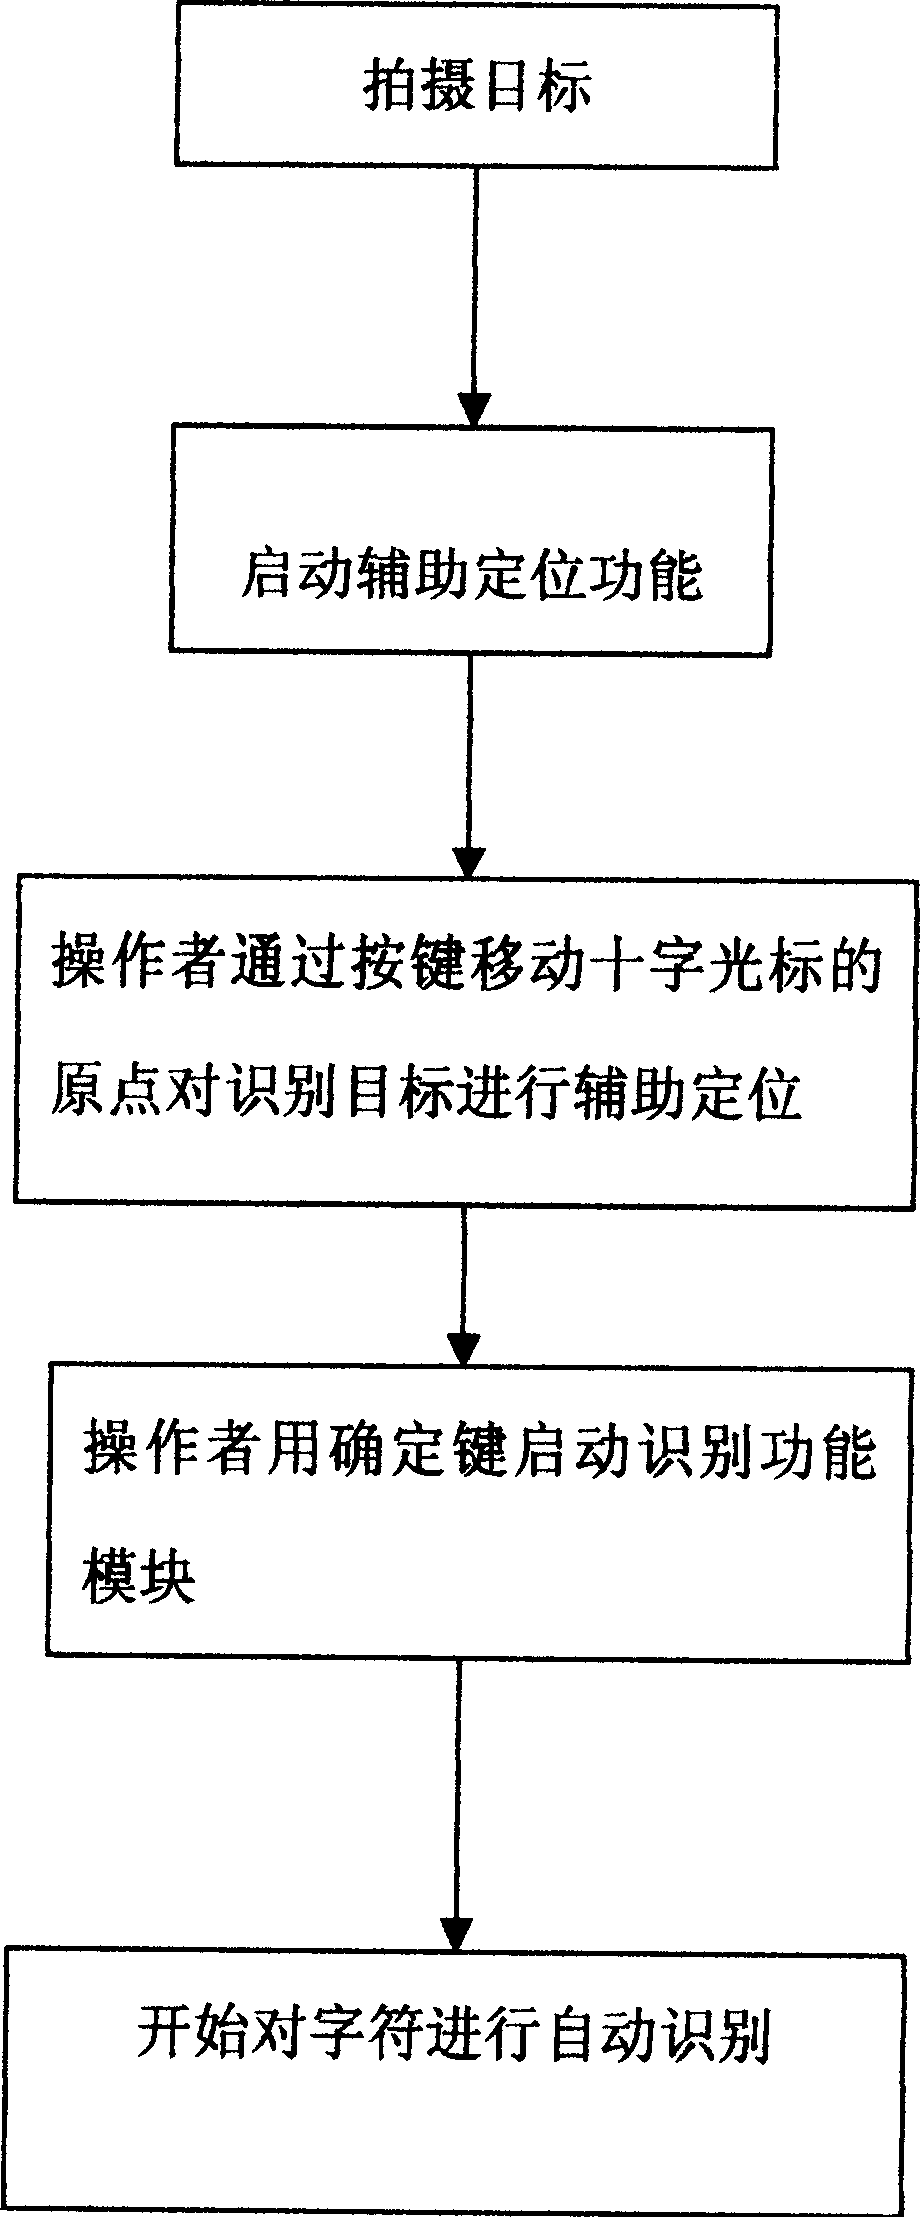 Novel assistant positioning system for implementing OCR function on mobile terminals with camera